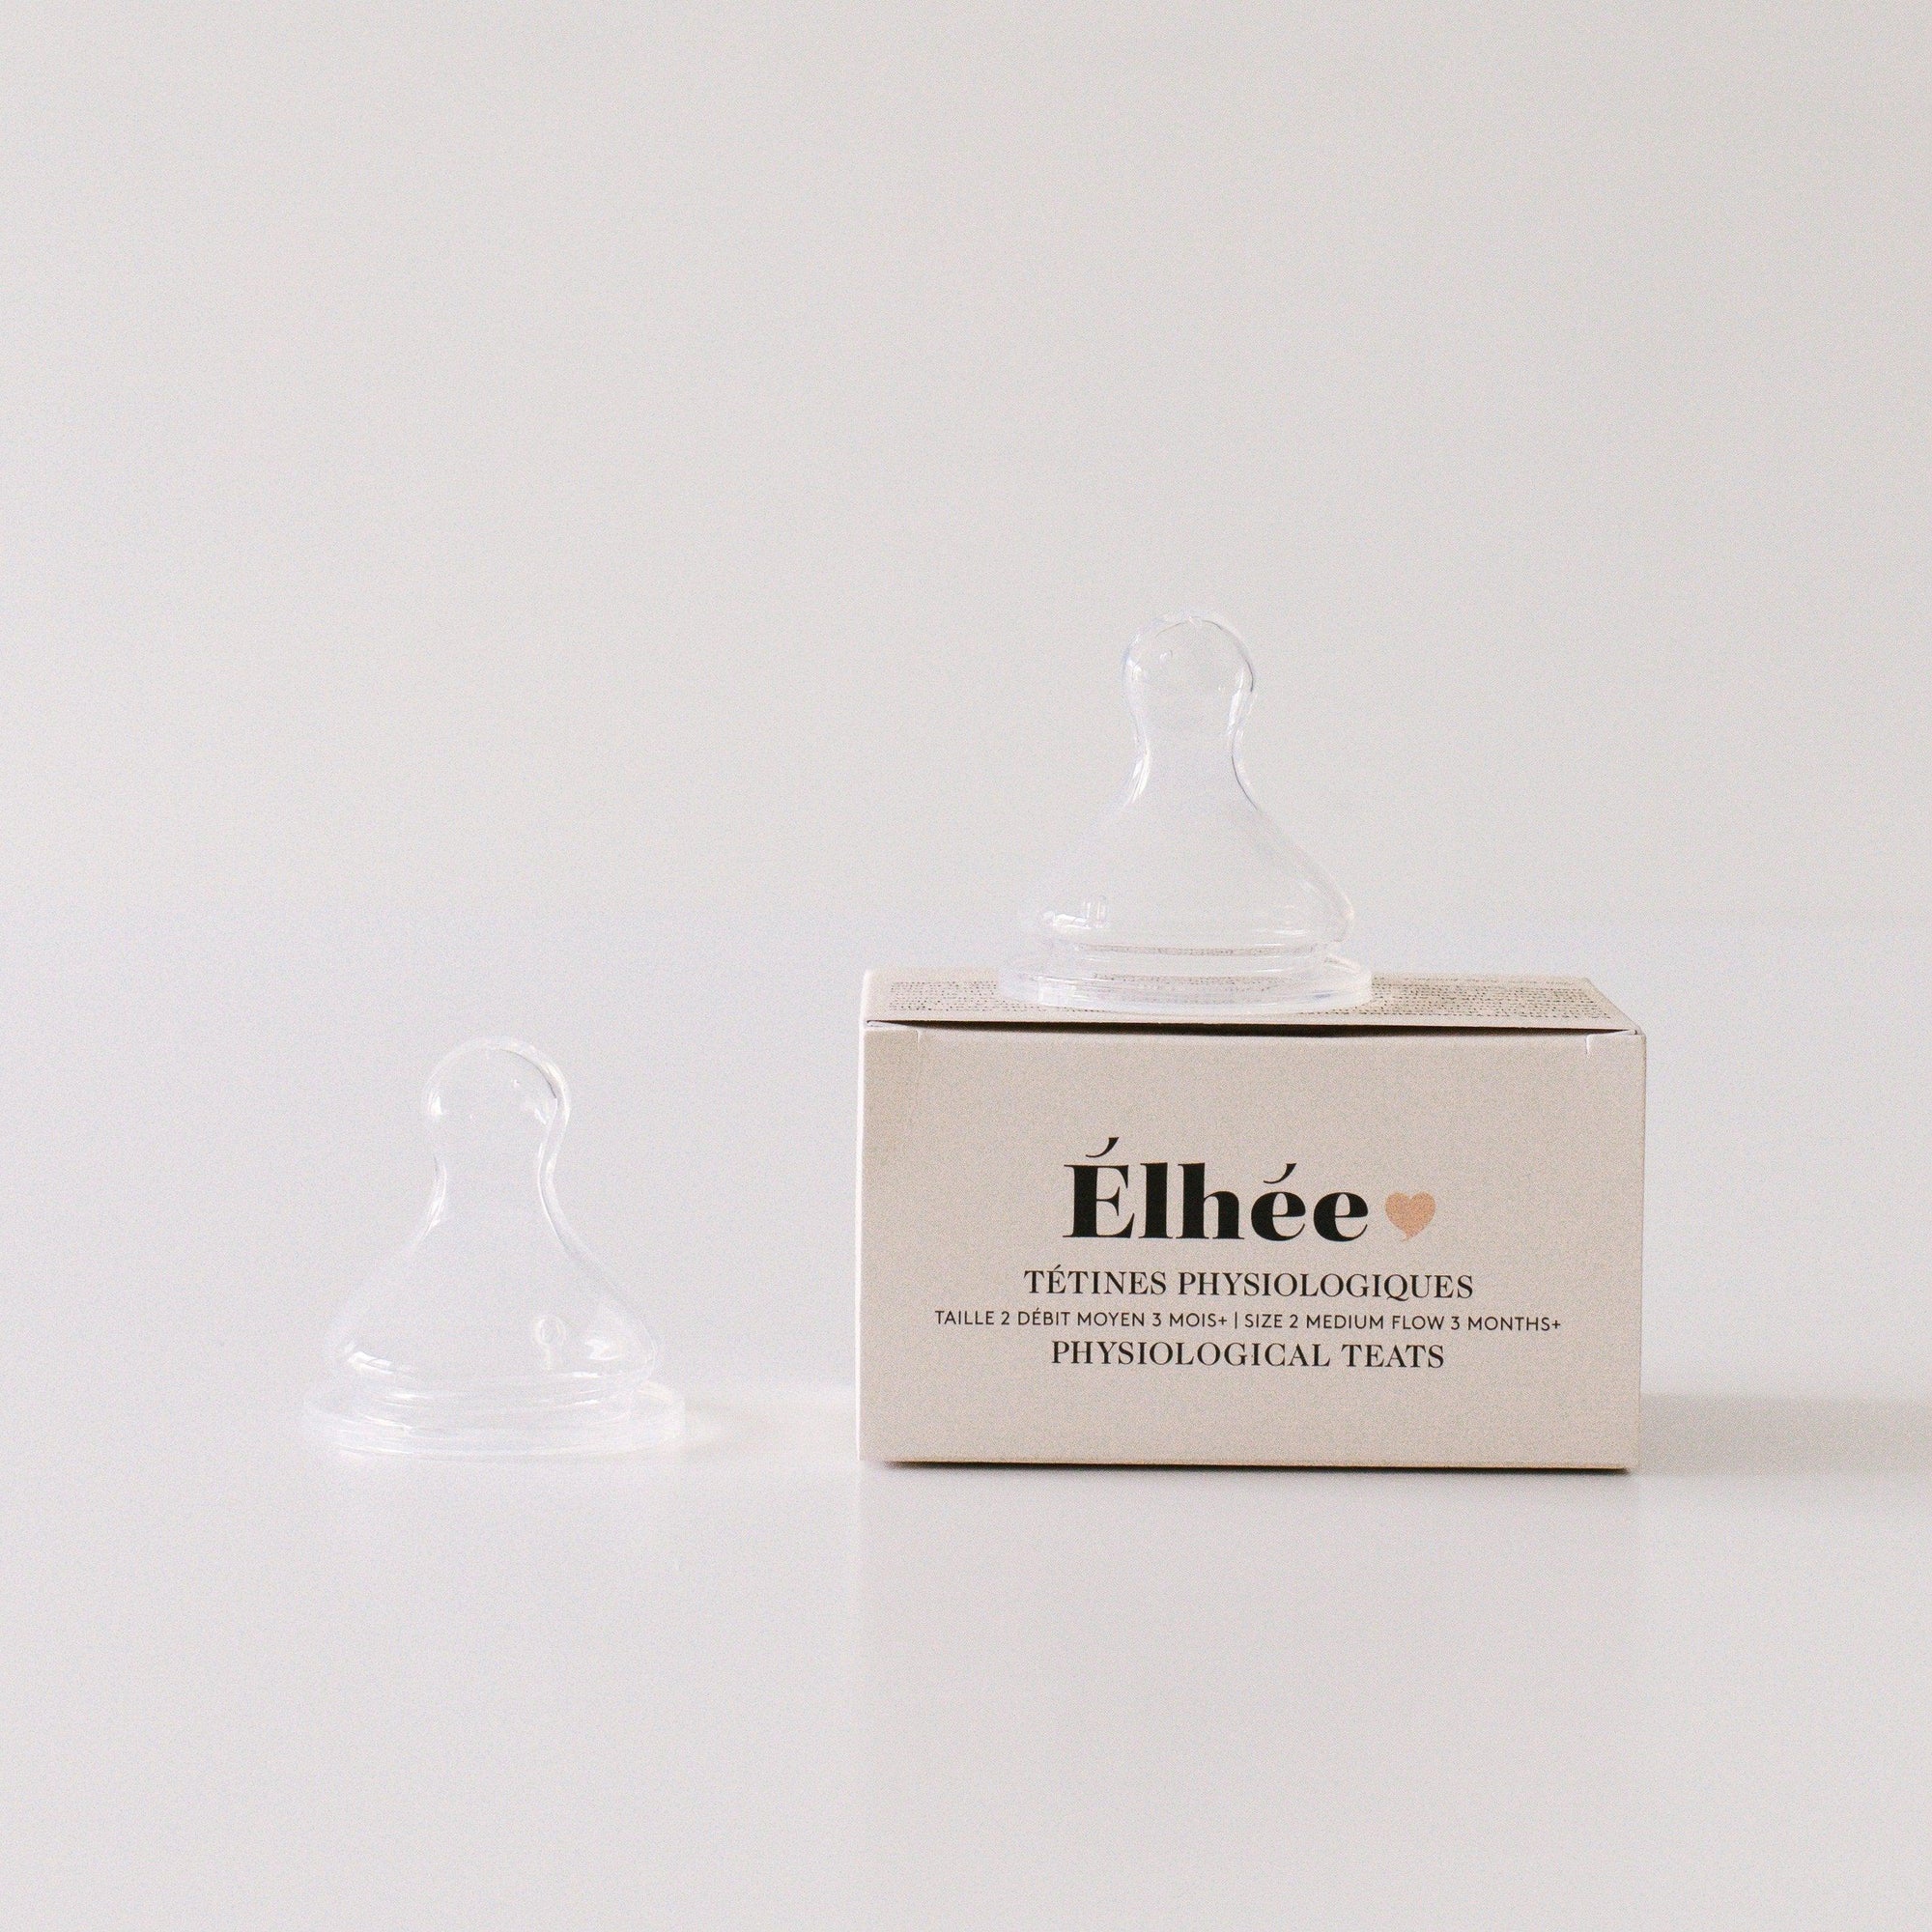 A set of Elhée France medium flow teats sitting on and next to their box on a white surface.